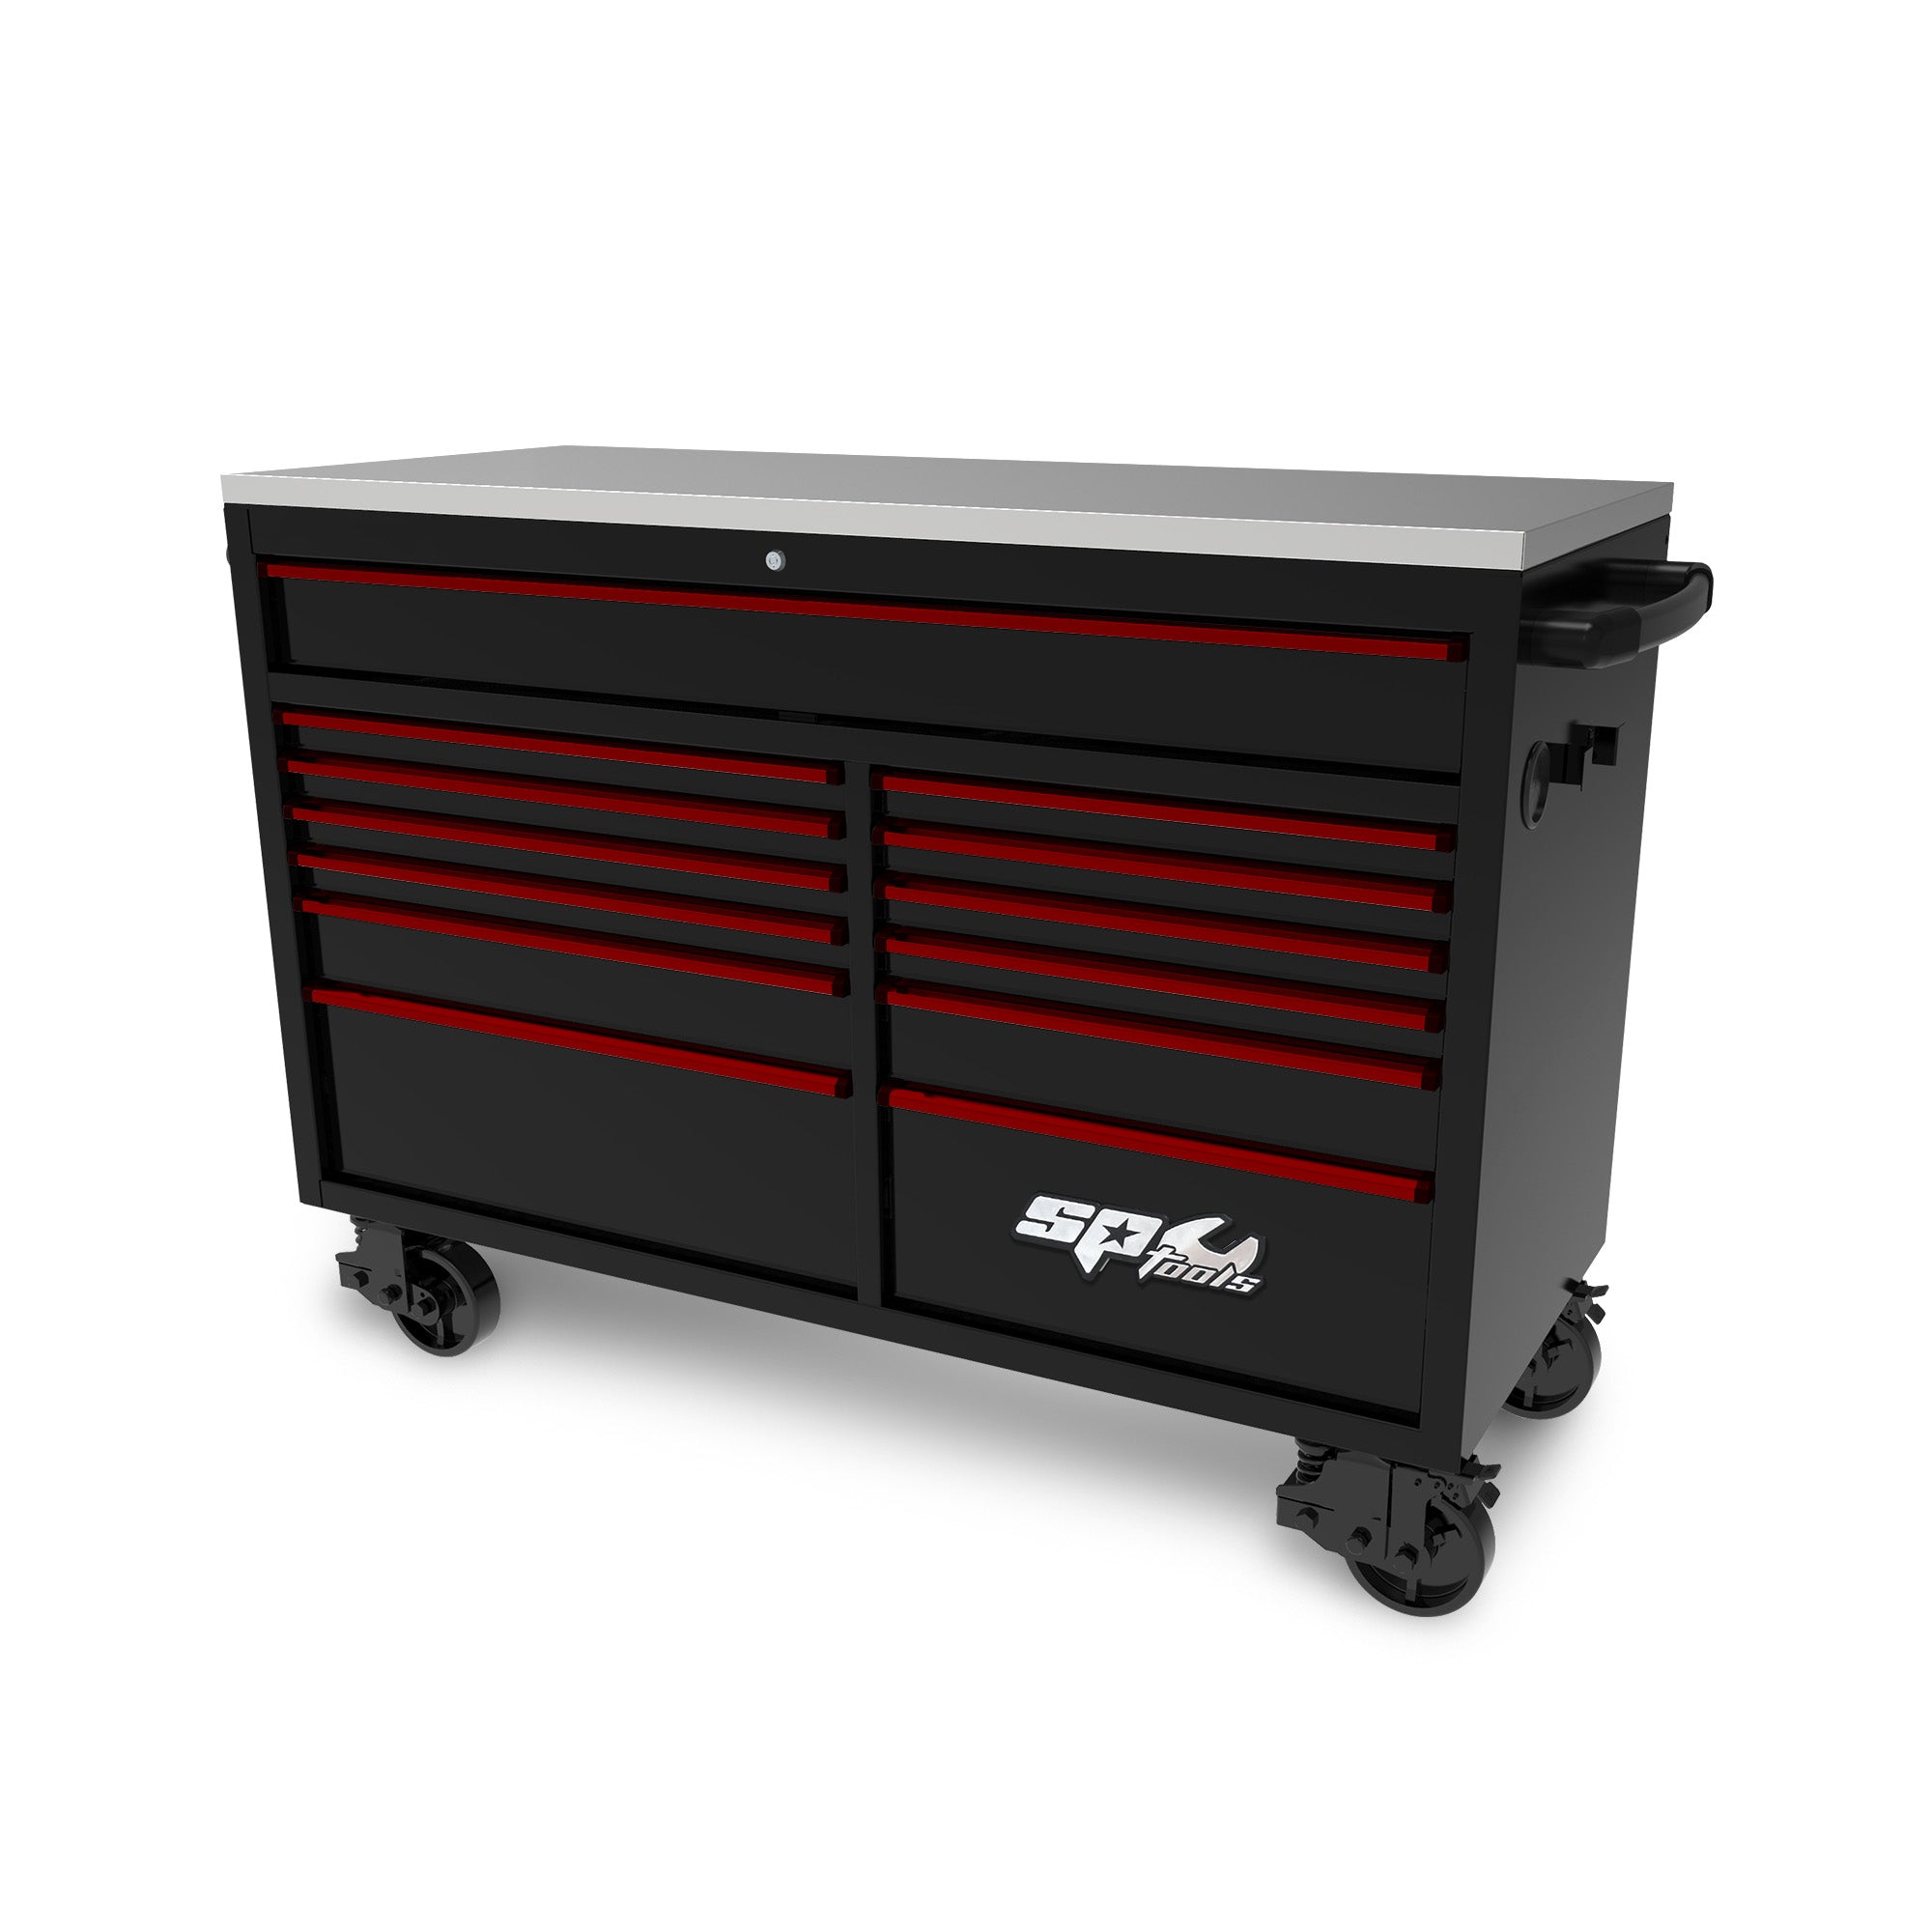 59" 13 Drawer Double Bank Toolbox Red w/ Chrome Trim